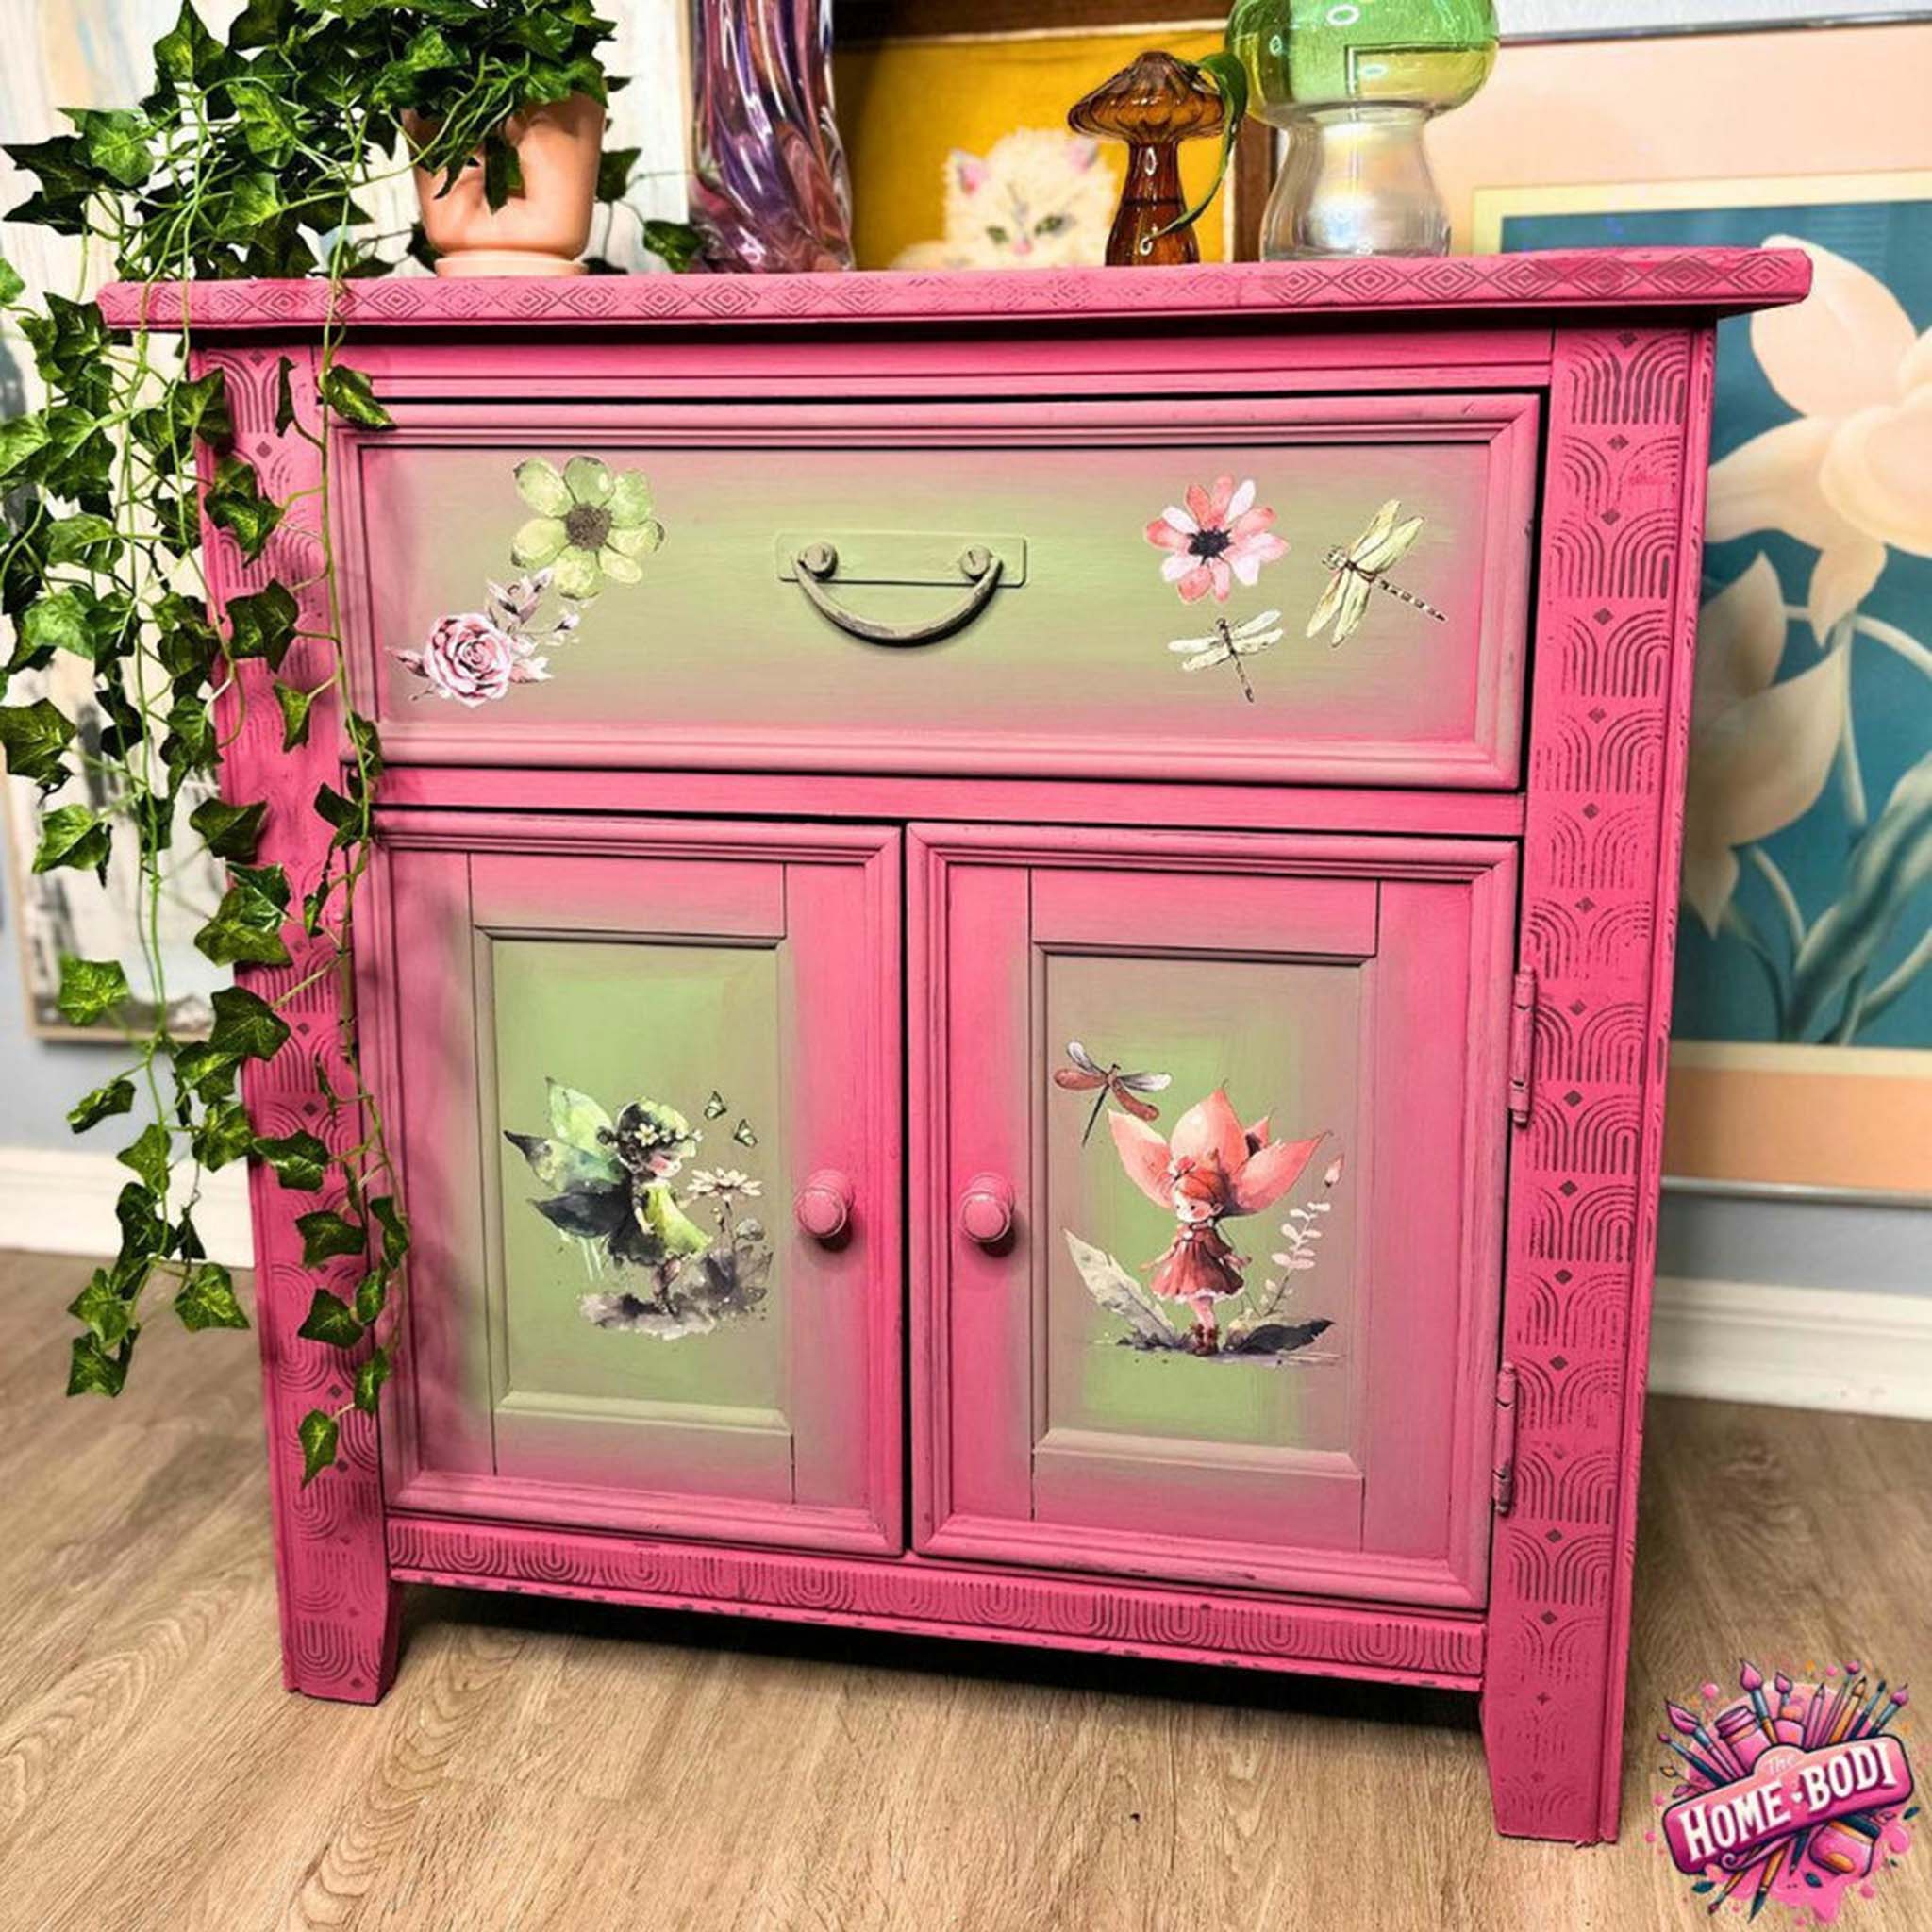 A vintage small buffet cabinet refurbished by The Home Bodi is painted pink and Spring green and features Belles & Whistles' Fairyland small rub-on transfer on its drawer and 2 doors.